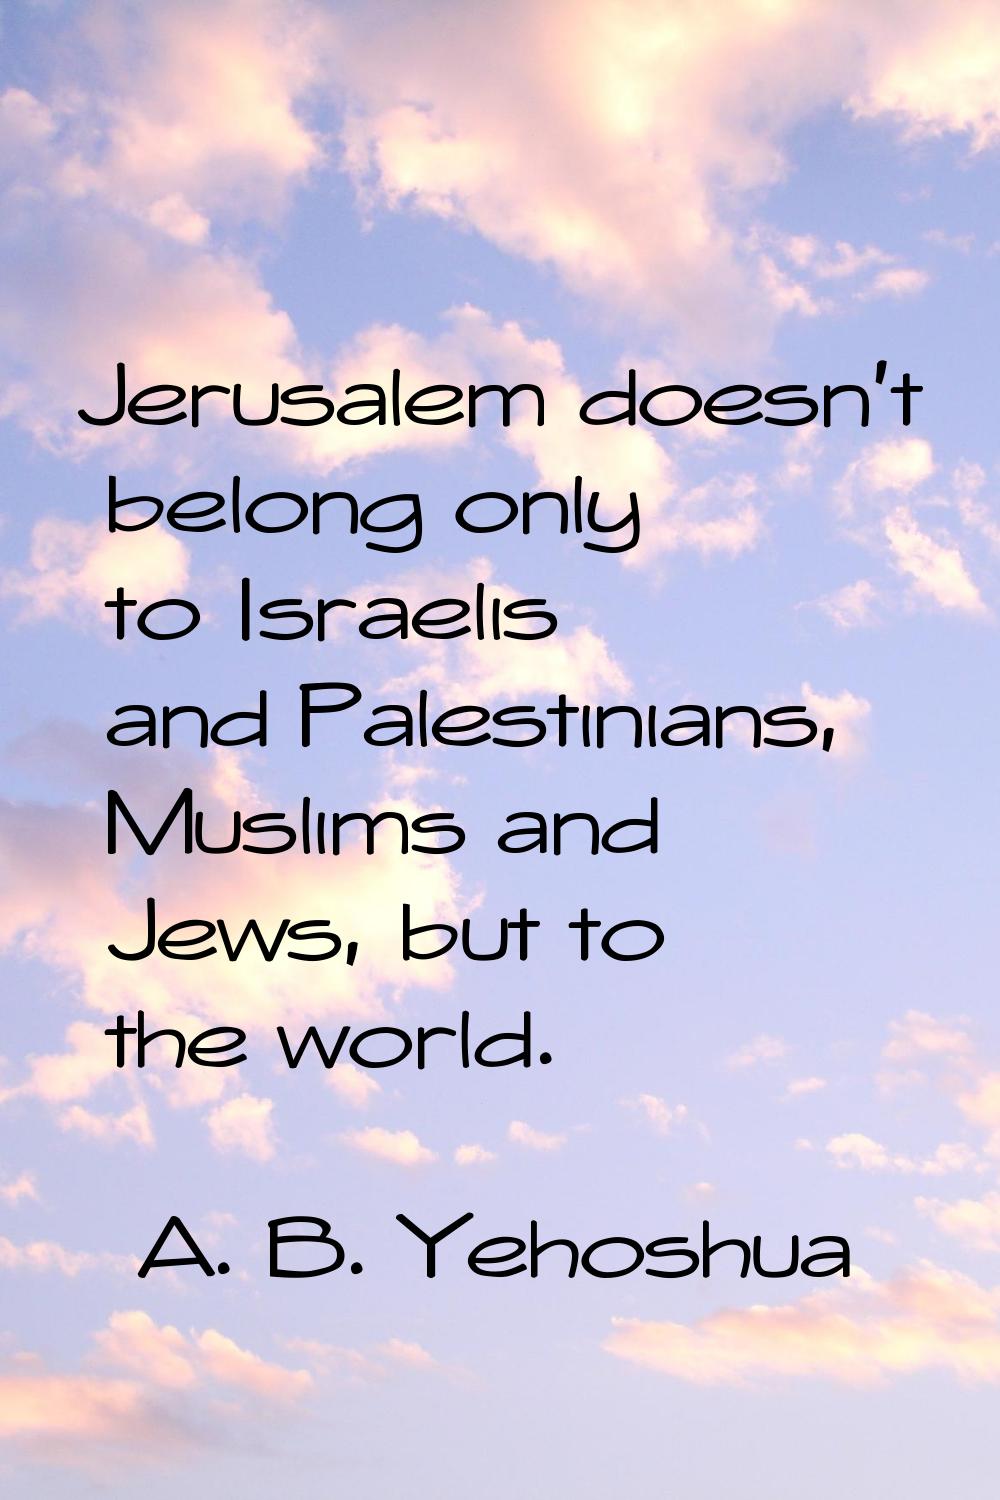 Jerusalem doesn't belong only to Israelis and Palestinians, Muslims and Jews, but to the world.